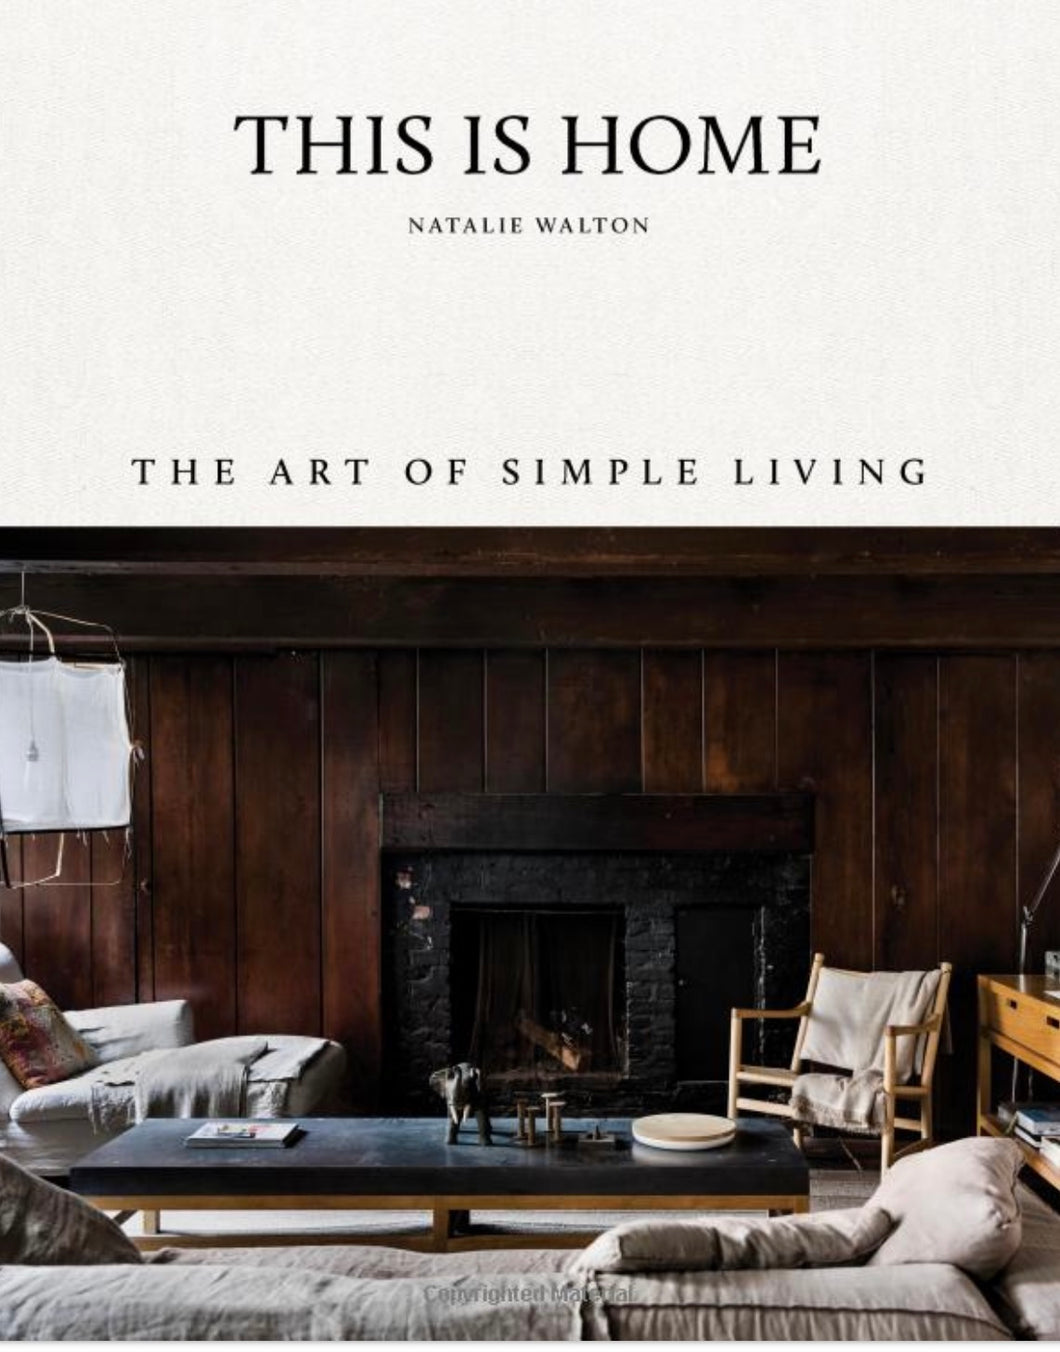 This is Home: The Art of Simple Living